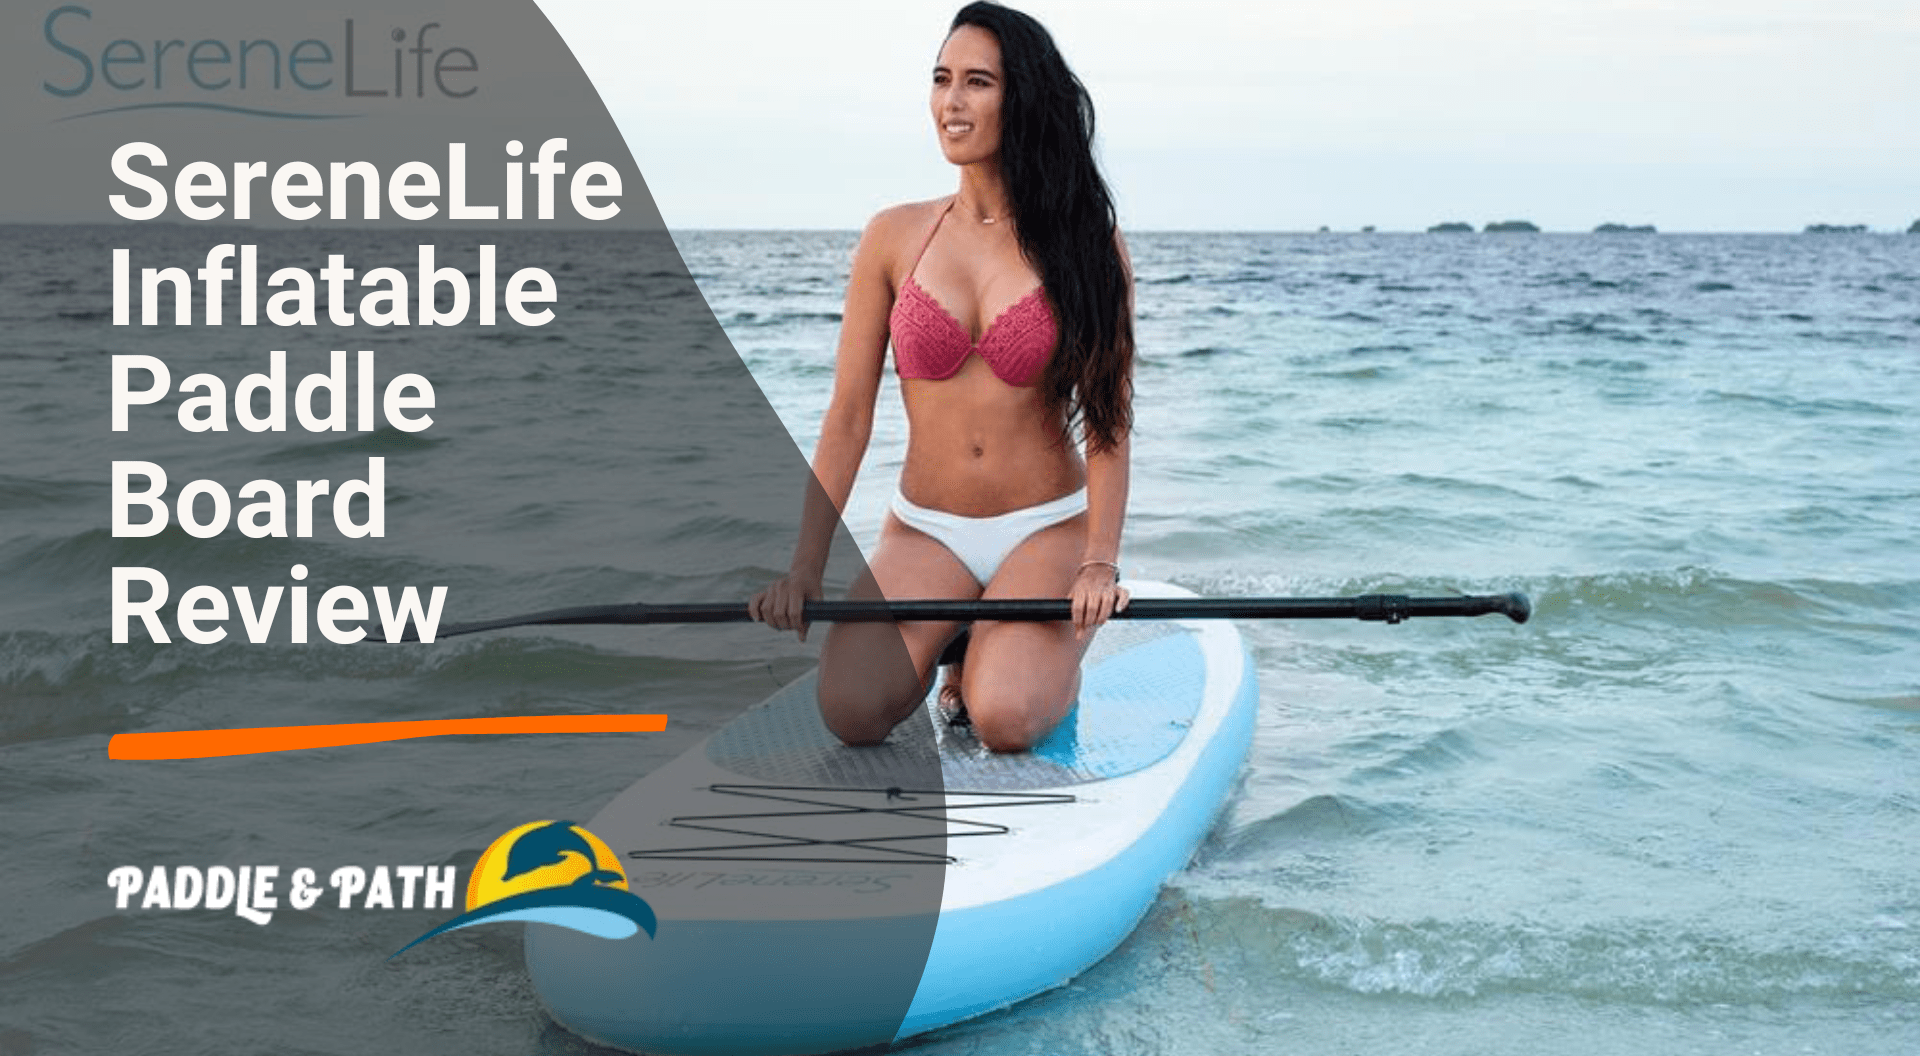 Serene Life Paddle Board Review